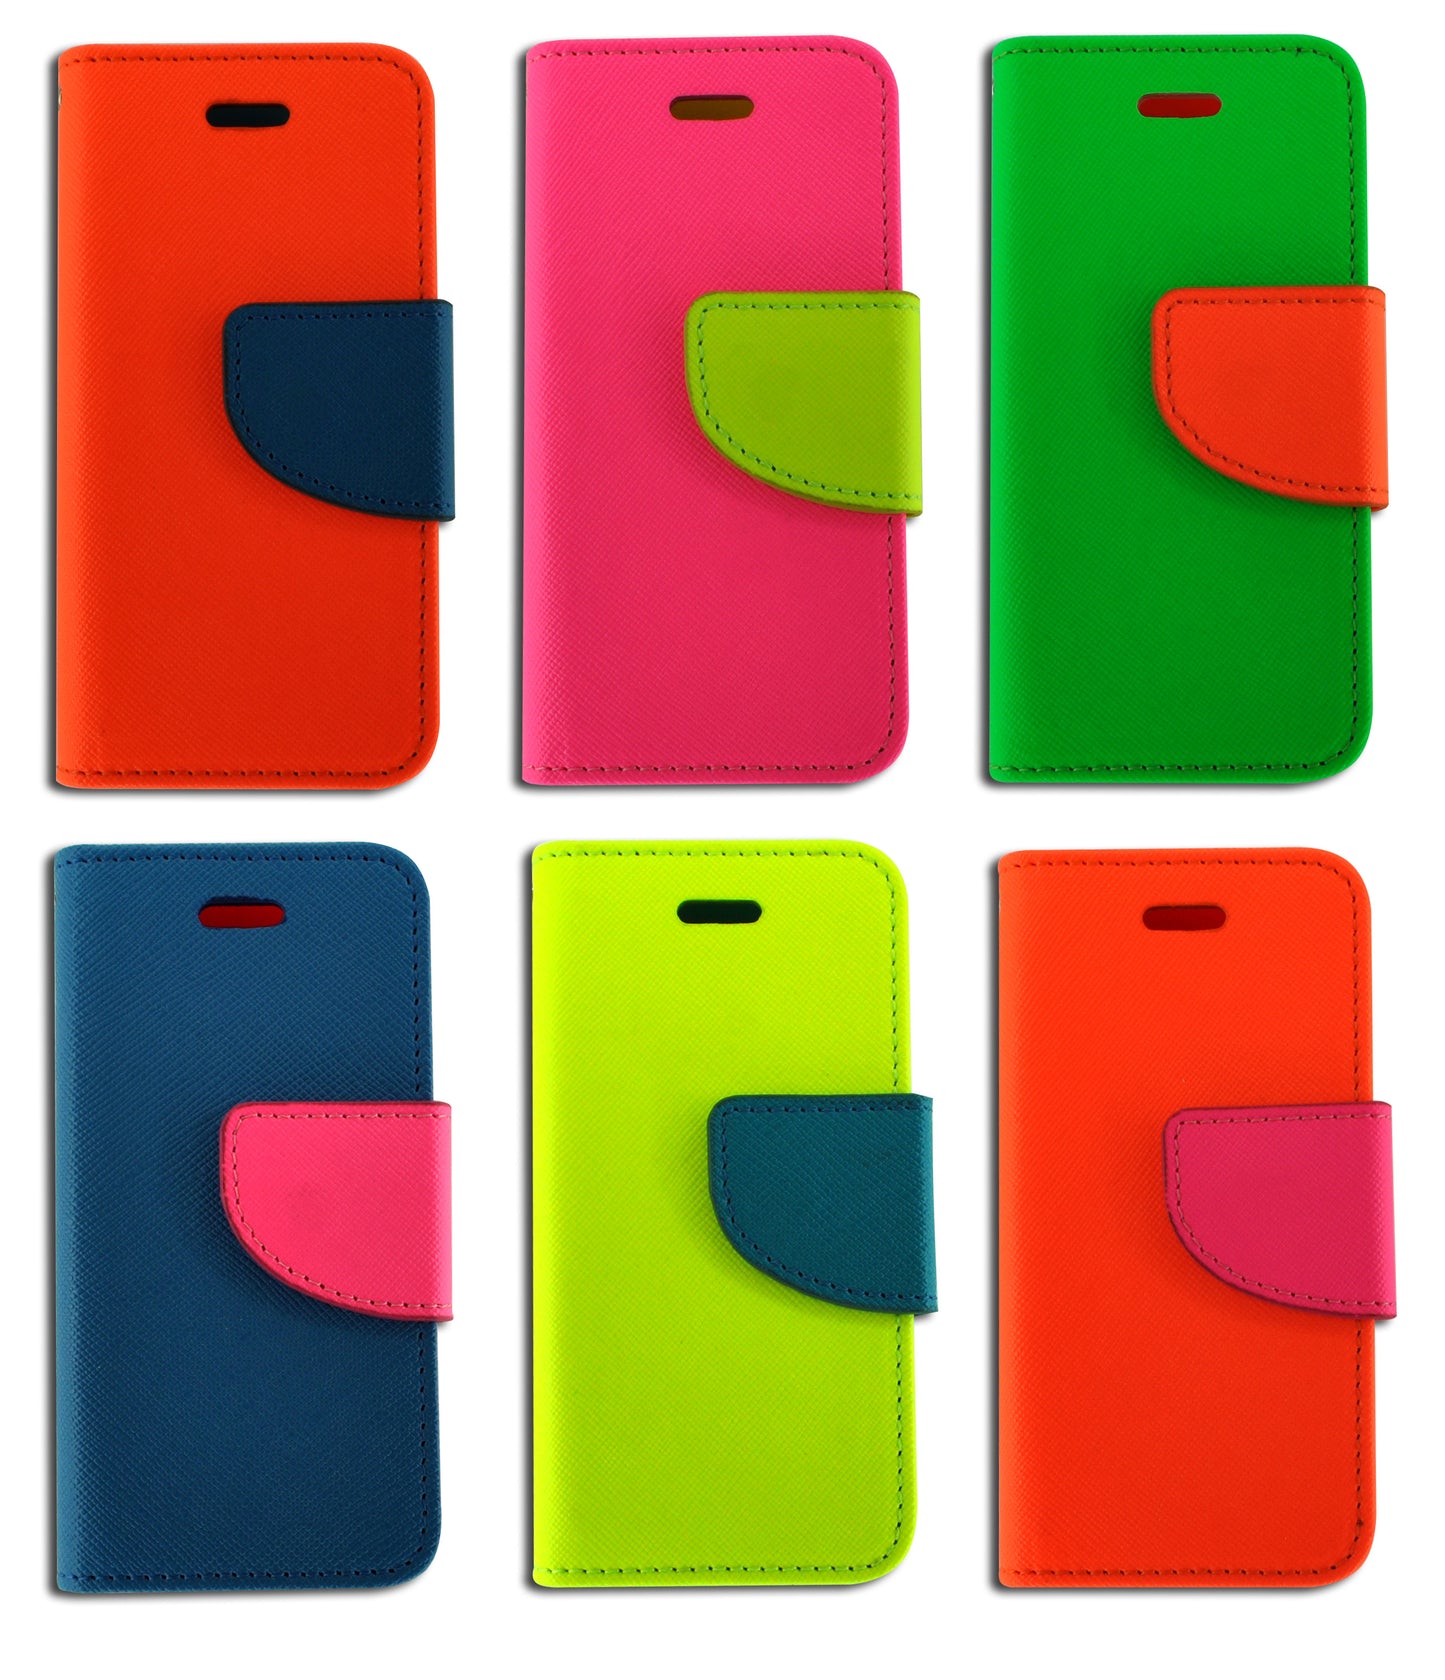 ITEM NUMBER 020271L NEON BOOKFOLD CELL CASE - STORE SURPLUS NO DISPLAY 6 PIECES PER PACK